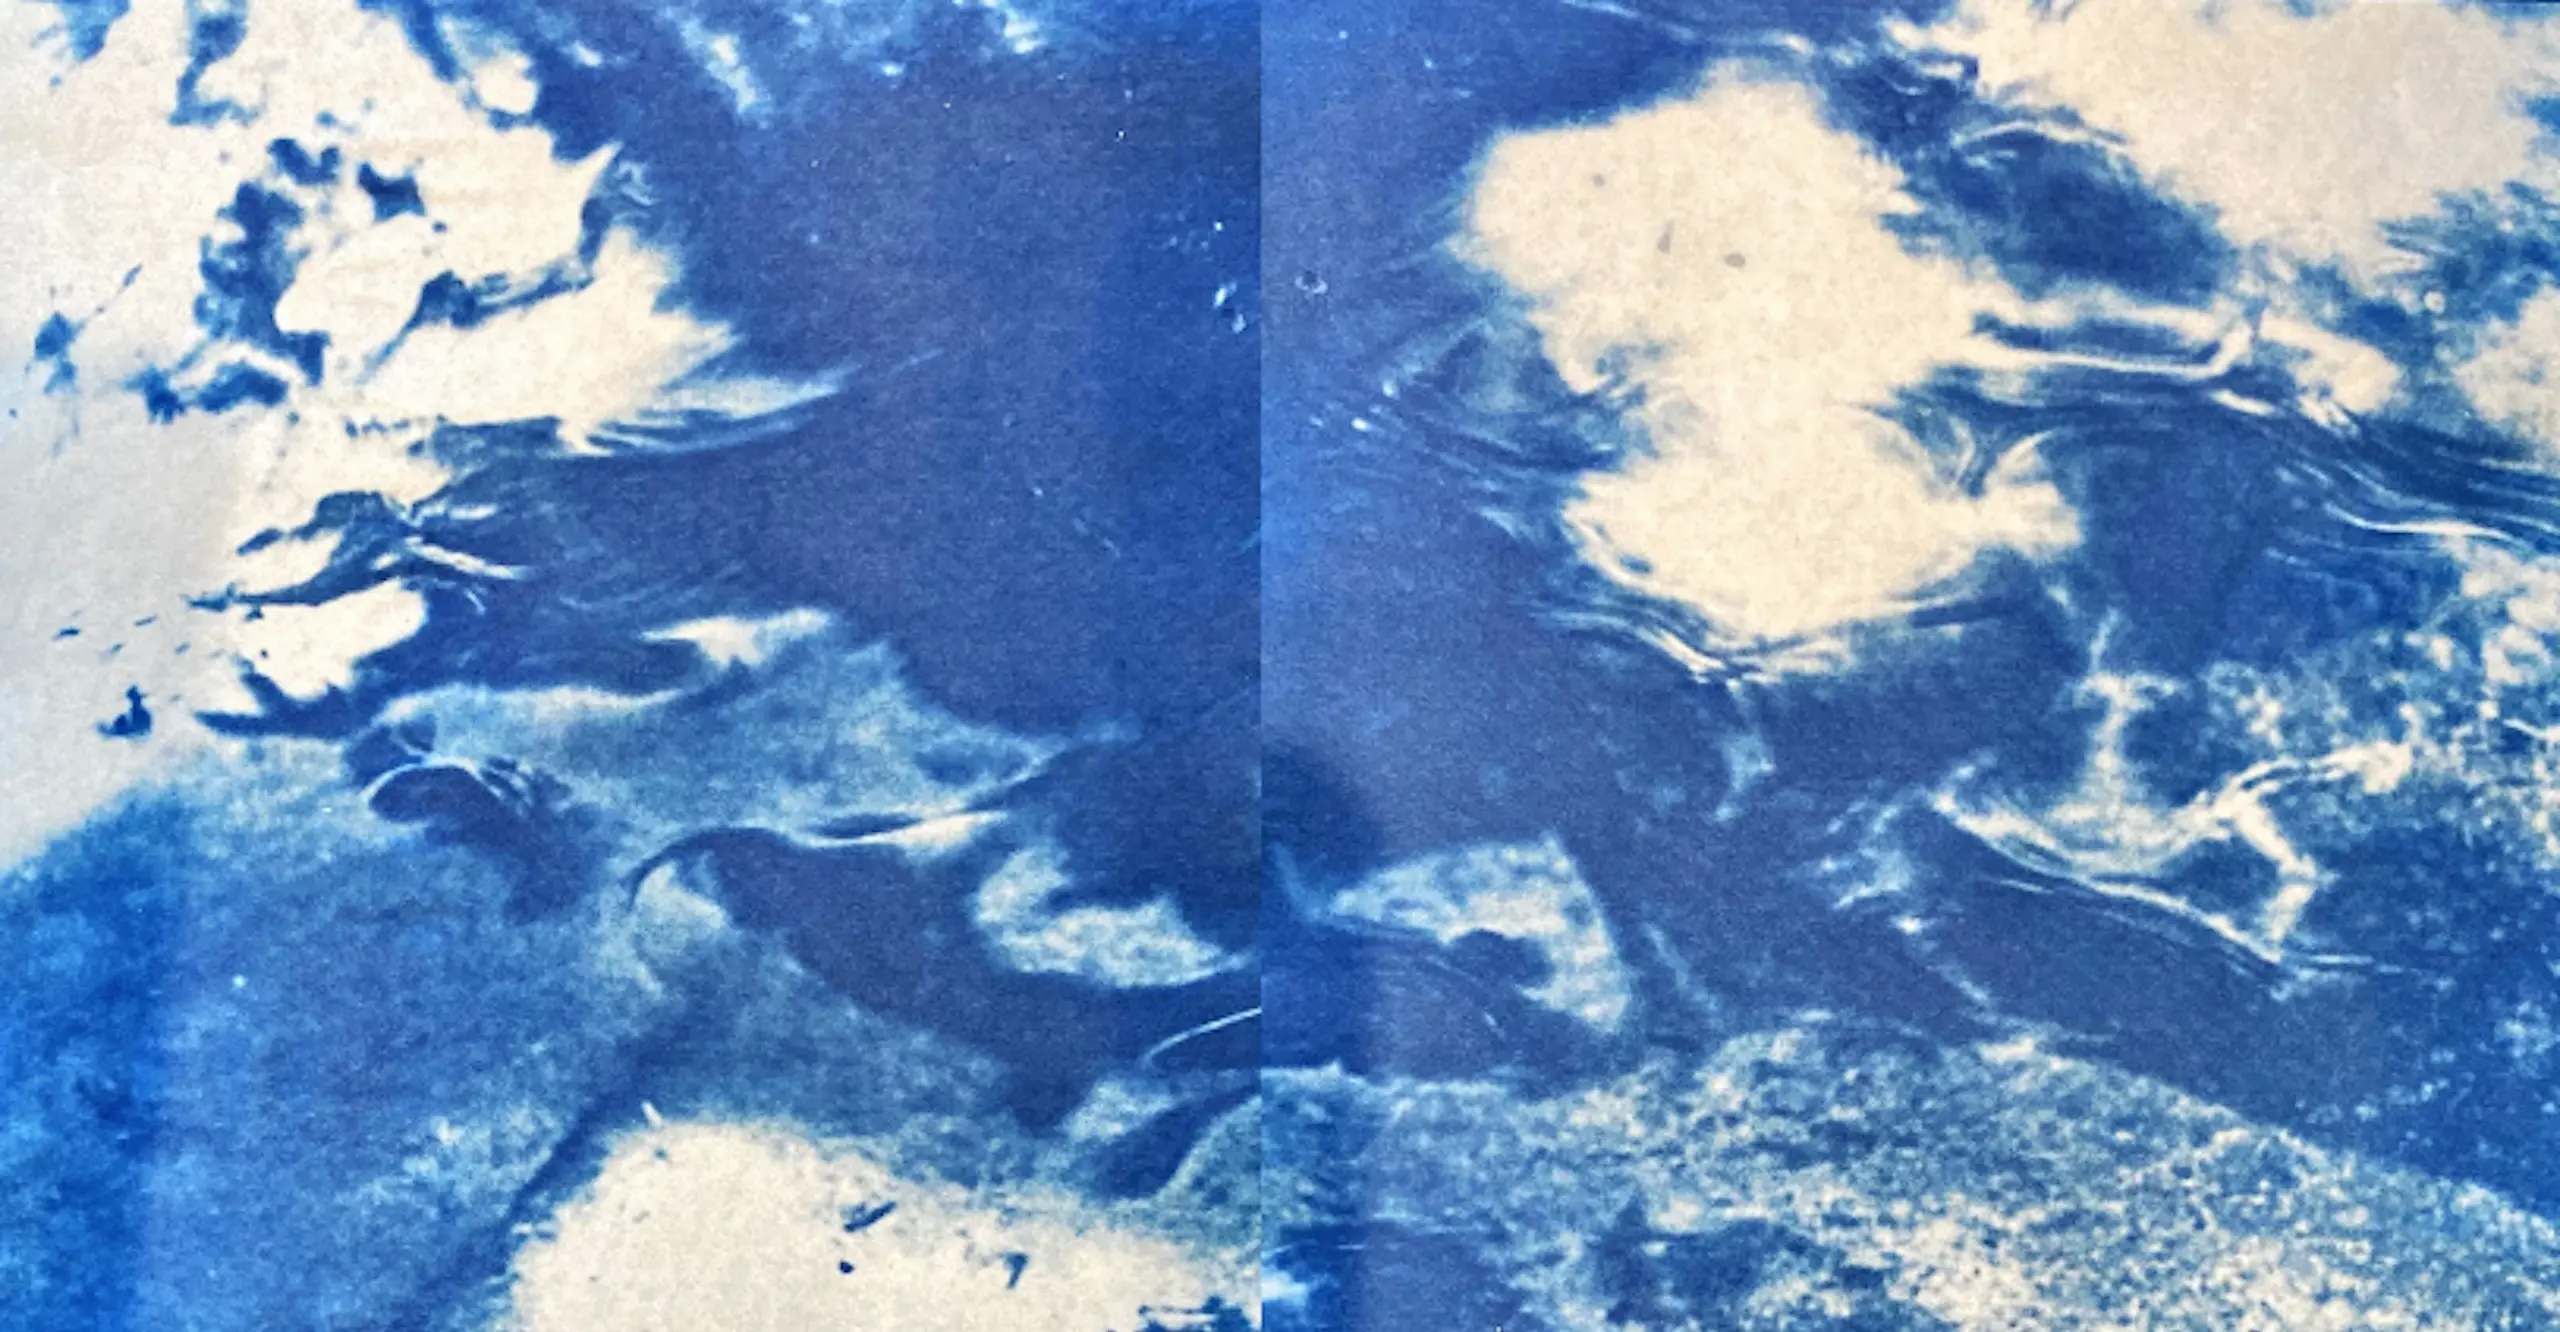 Cyanotype (blue) photograph of a close up surface of water.